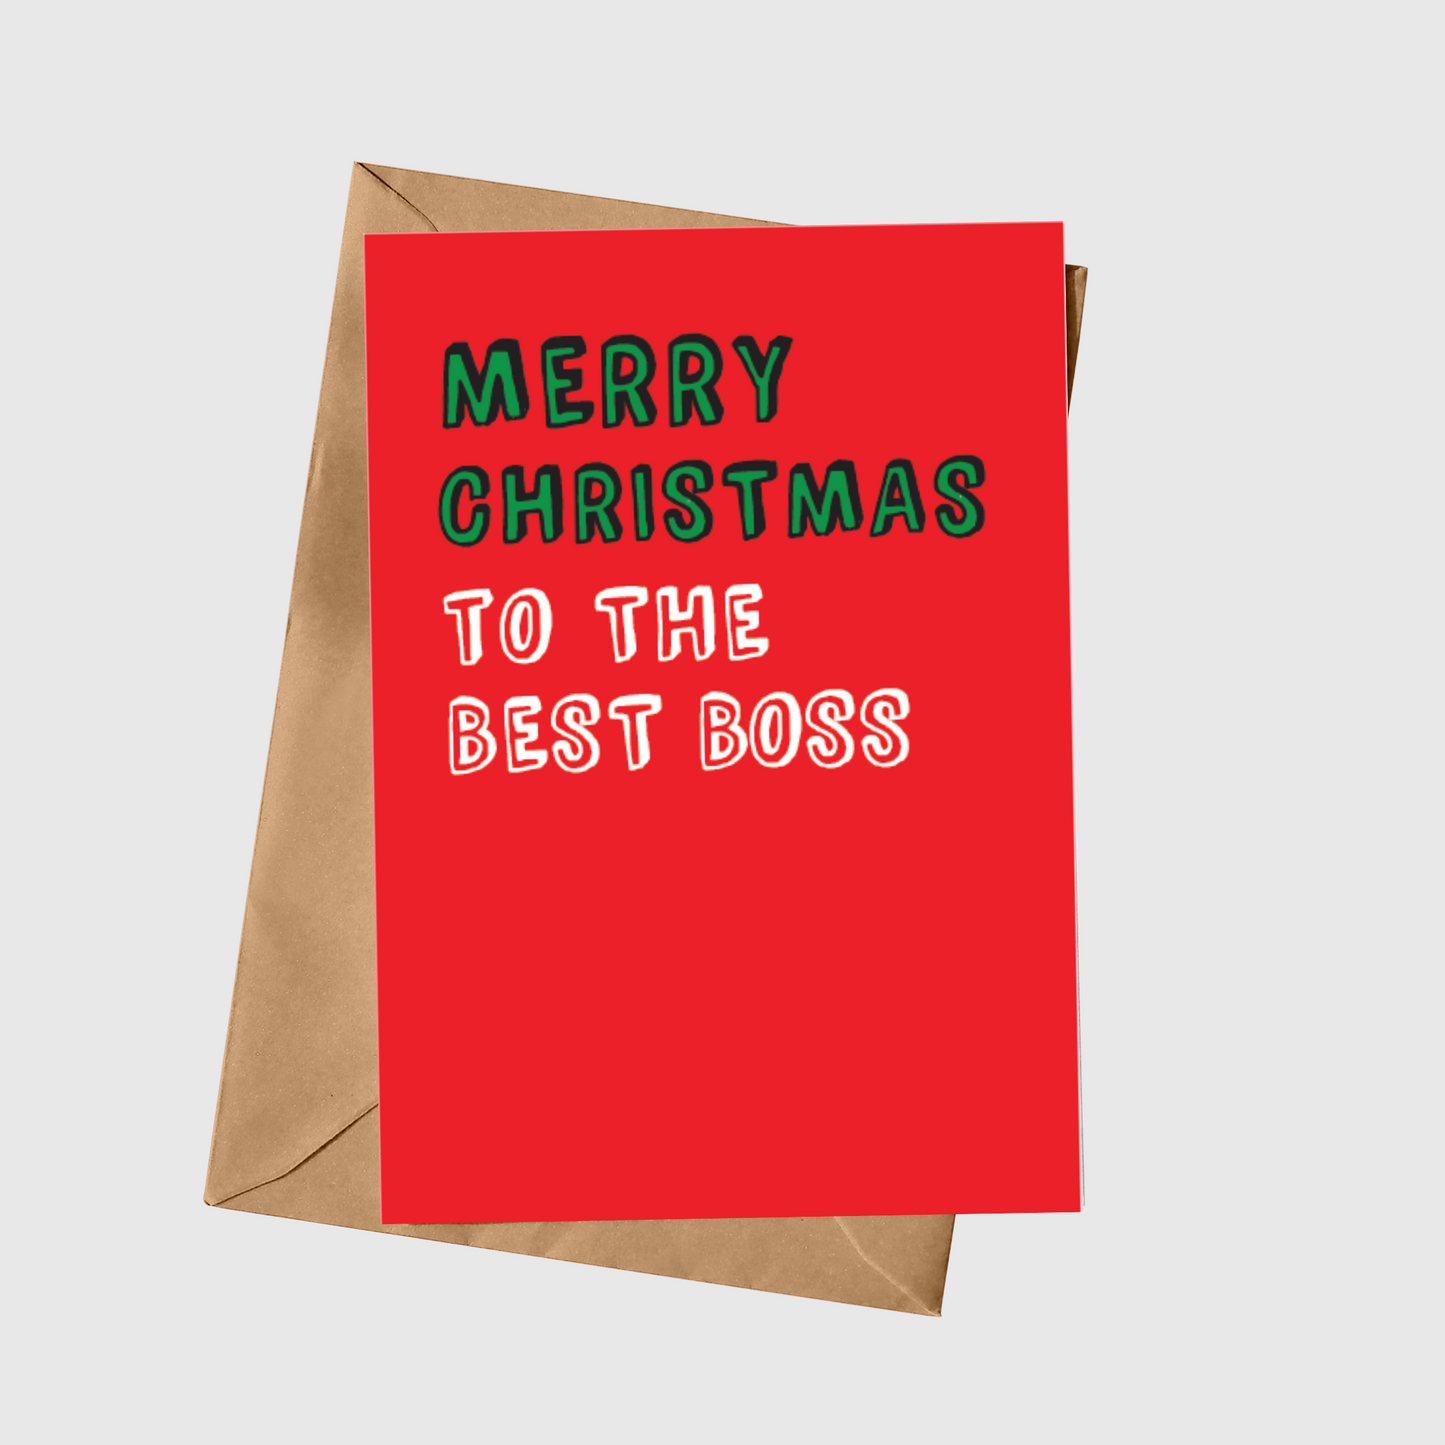 Merry Christmas To The Best Boss